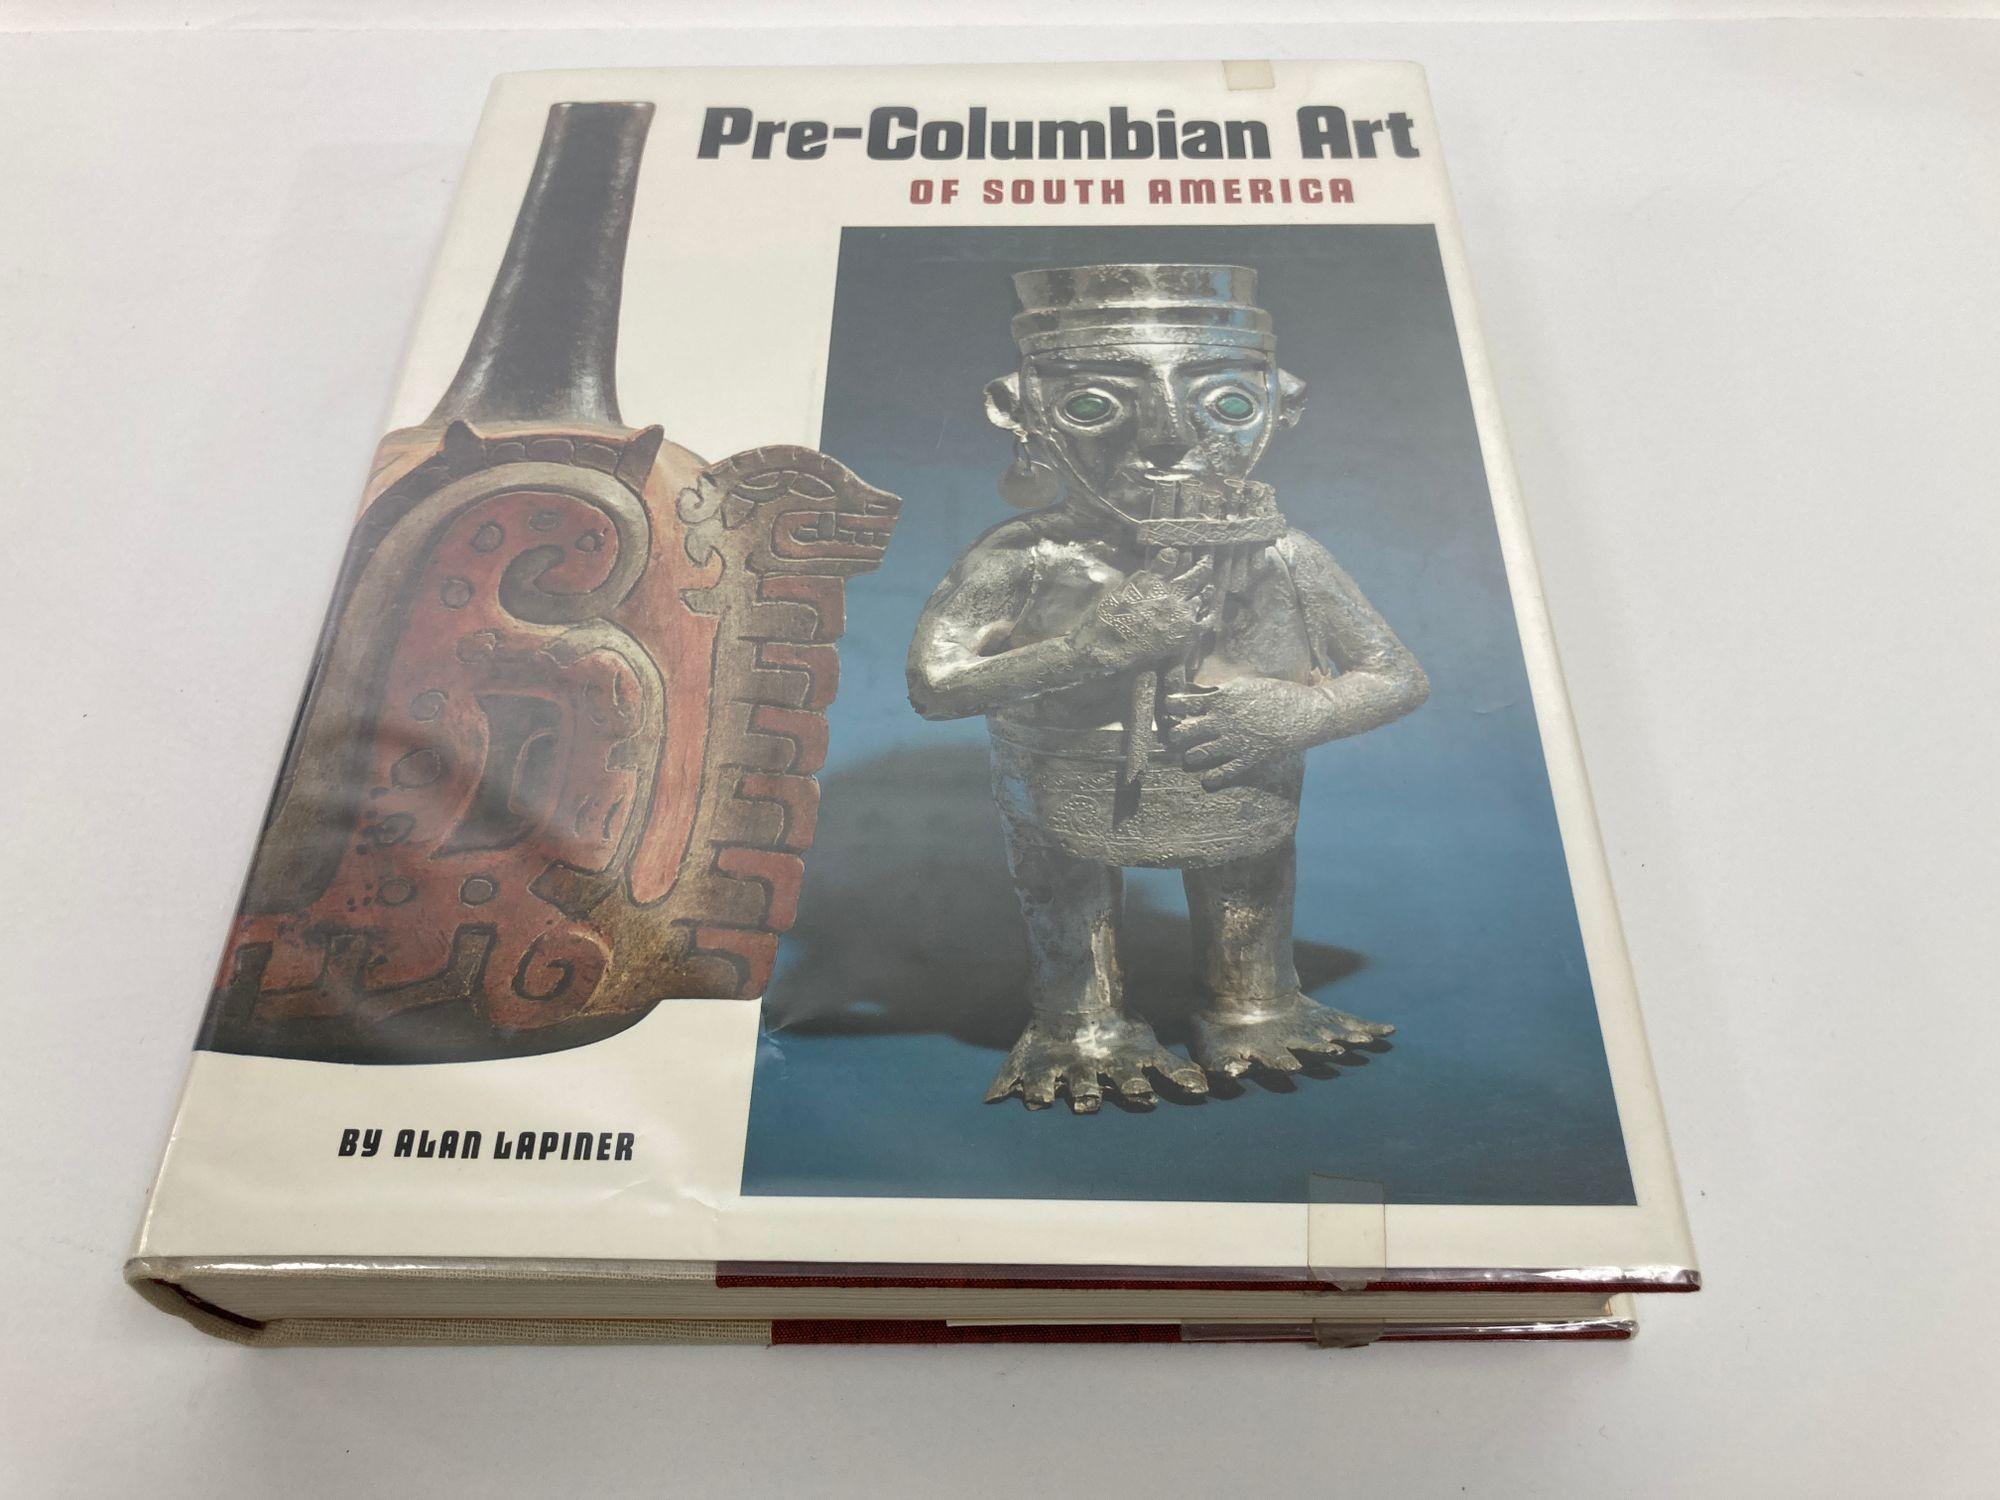 Pre-Columbian Art of South America by Alan Lapiner. 1st Edition, 1st publication.
Published by Abrams, New York, 1976.
New York, Abrams, 1976. Large quarto, 460 pages with '910 illustrations including 225 in full color' (with many of the latter